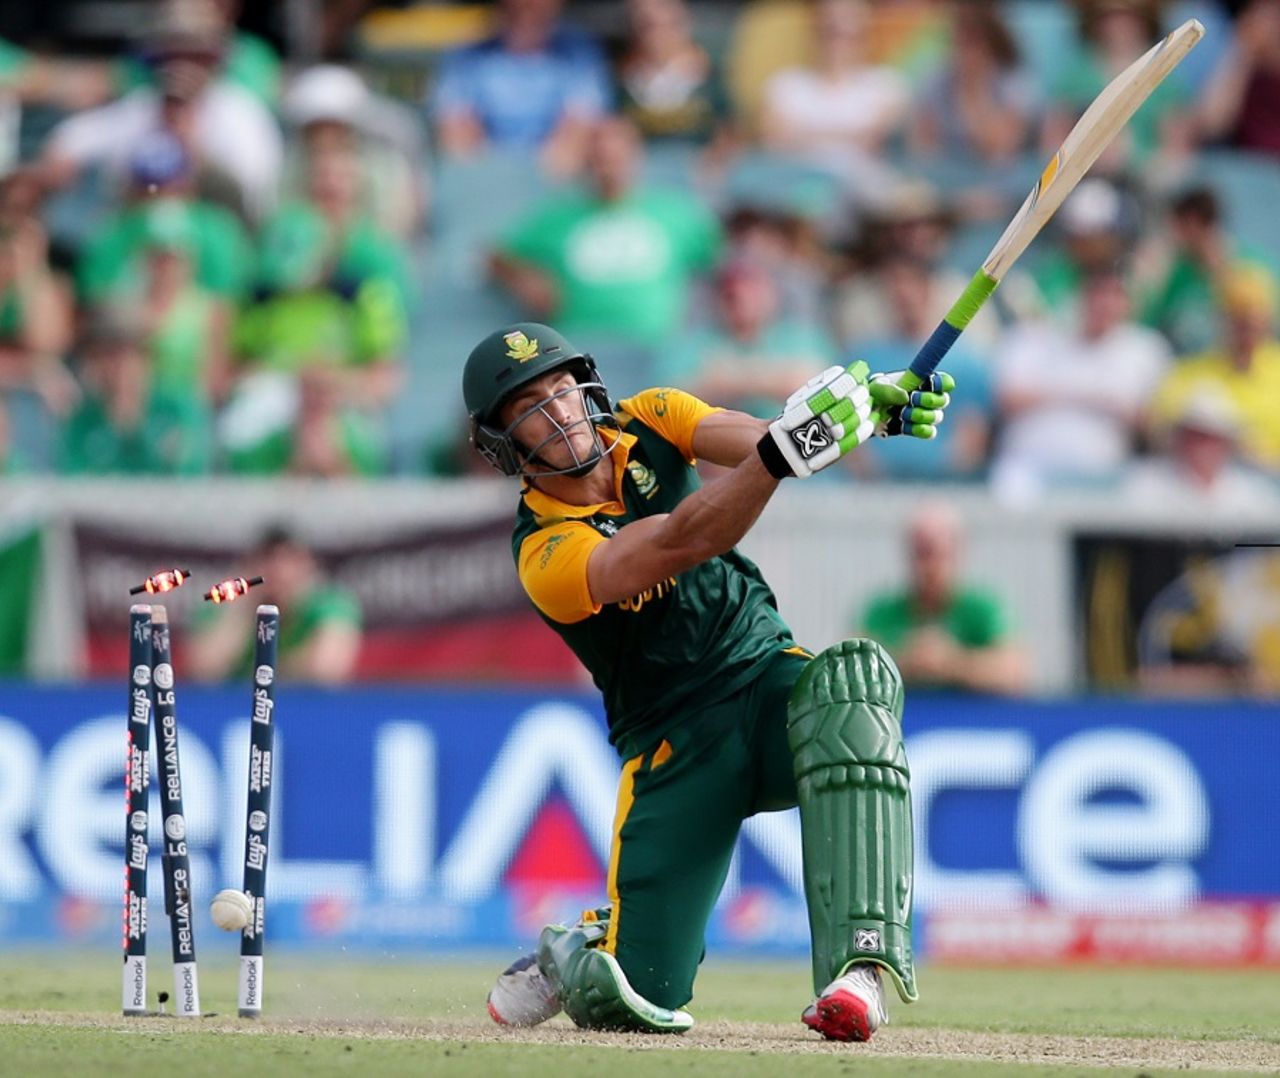 Faf du Plessis missed a yorker and was bowled, Ireland v South Africa, World Cup 2015, Group B, Canberra, March 3, 2015